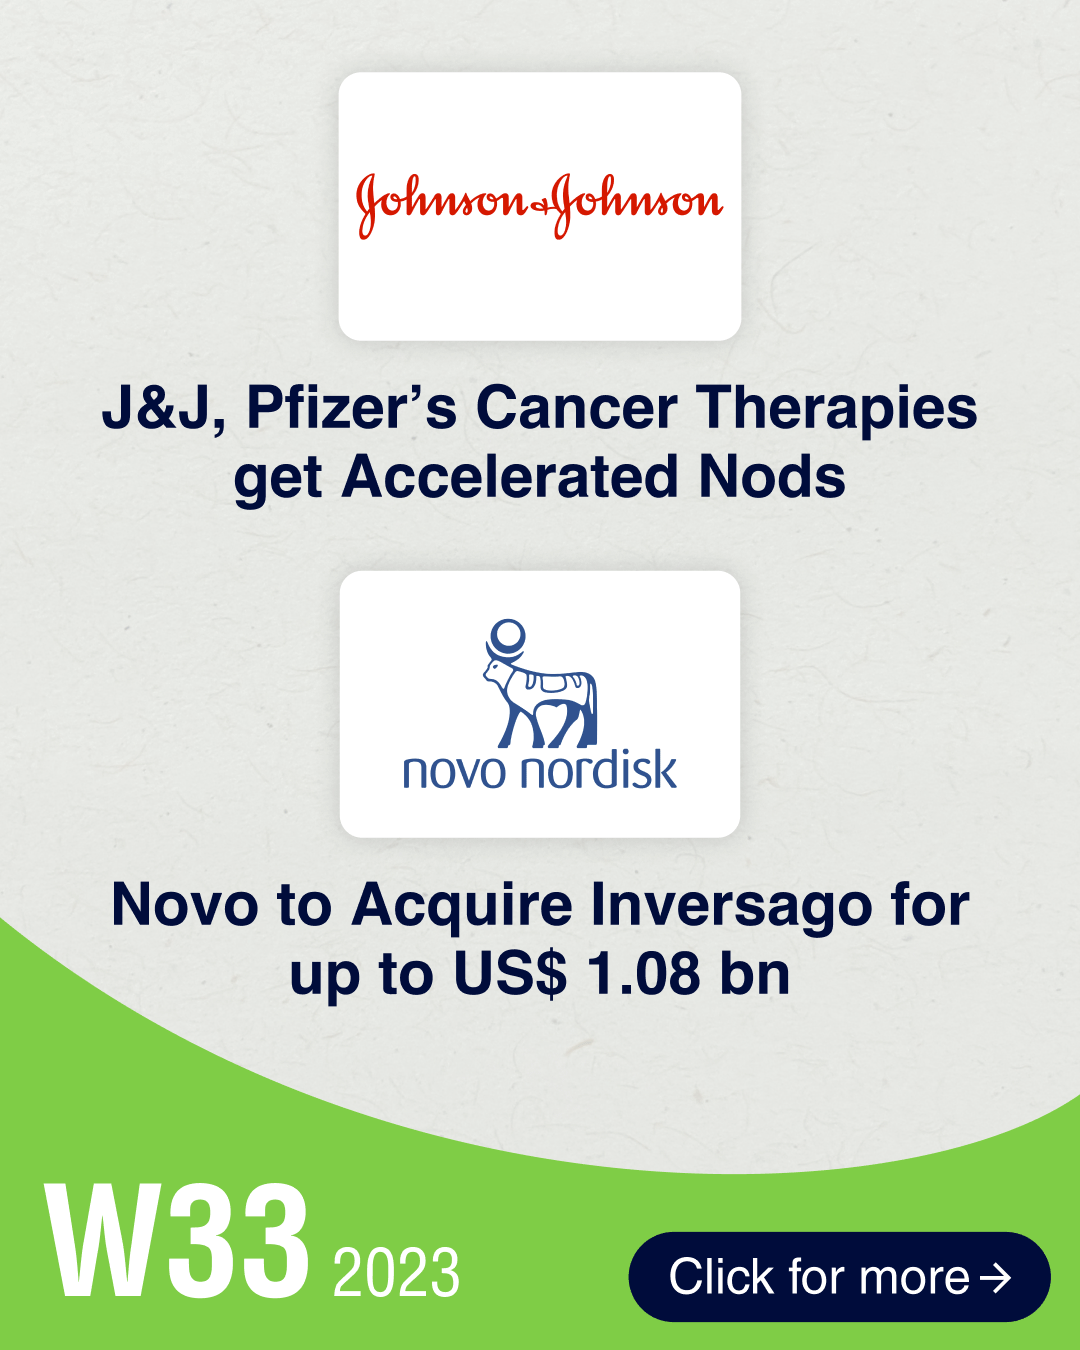 FDA grants accelerated nods to J&J, Pfizer’s blood cancer therapies; Ipsen’s rare disease drug approved